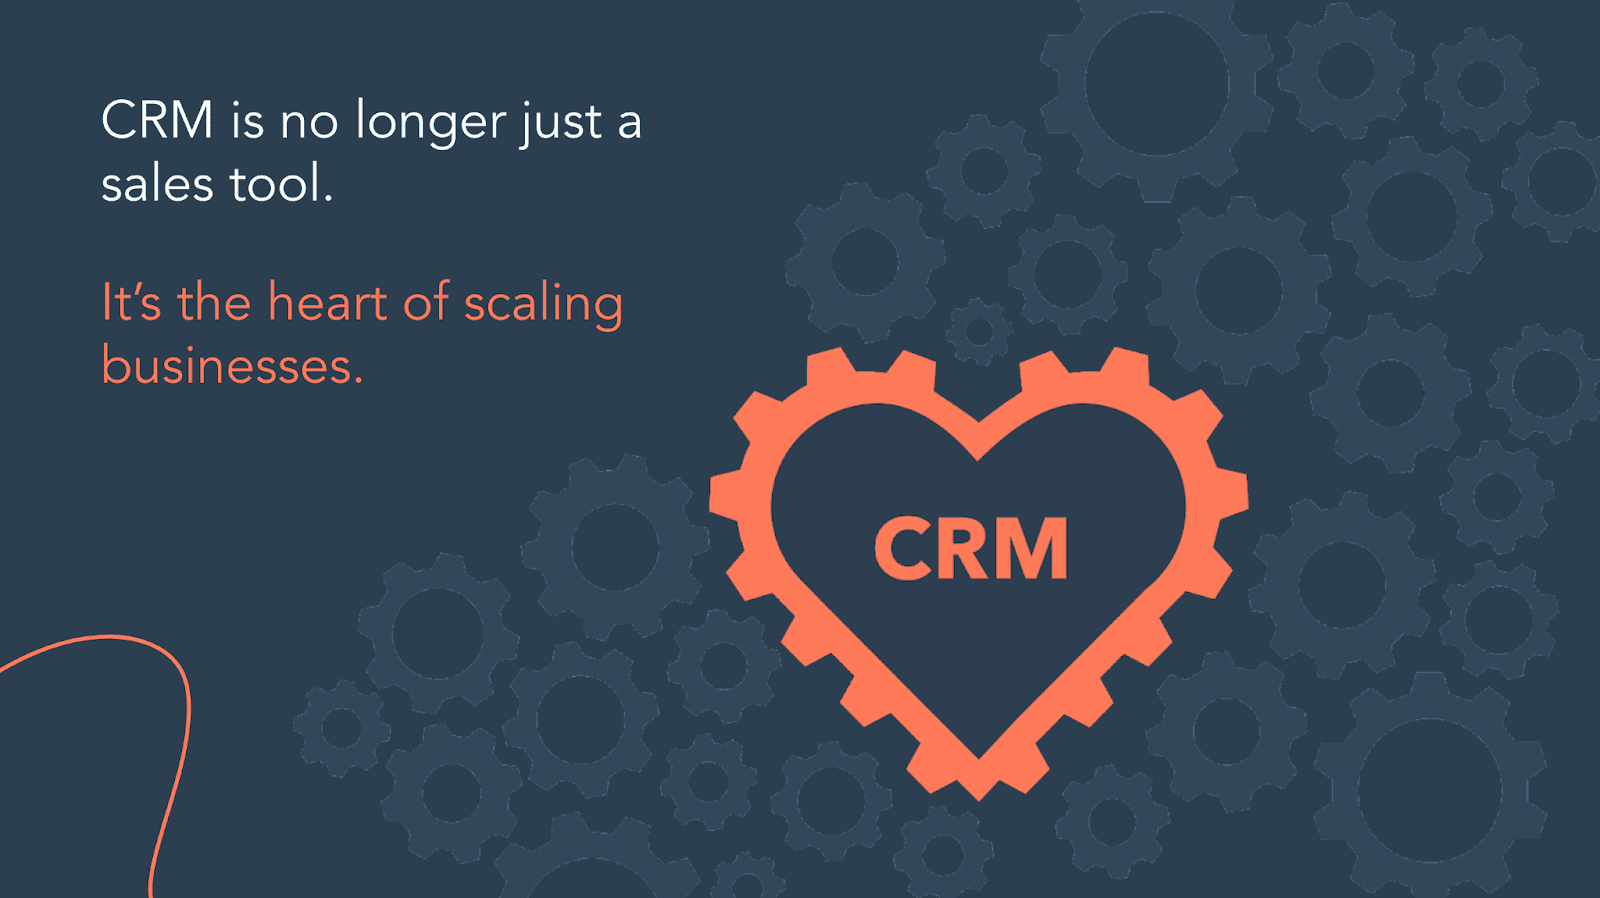 Leverage the HubSpot CRM to Power Your Marketing